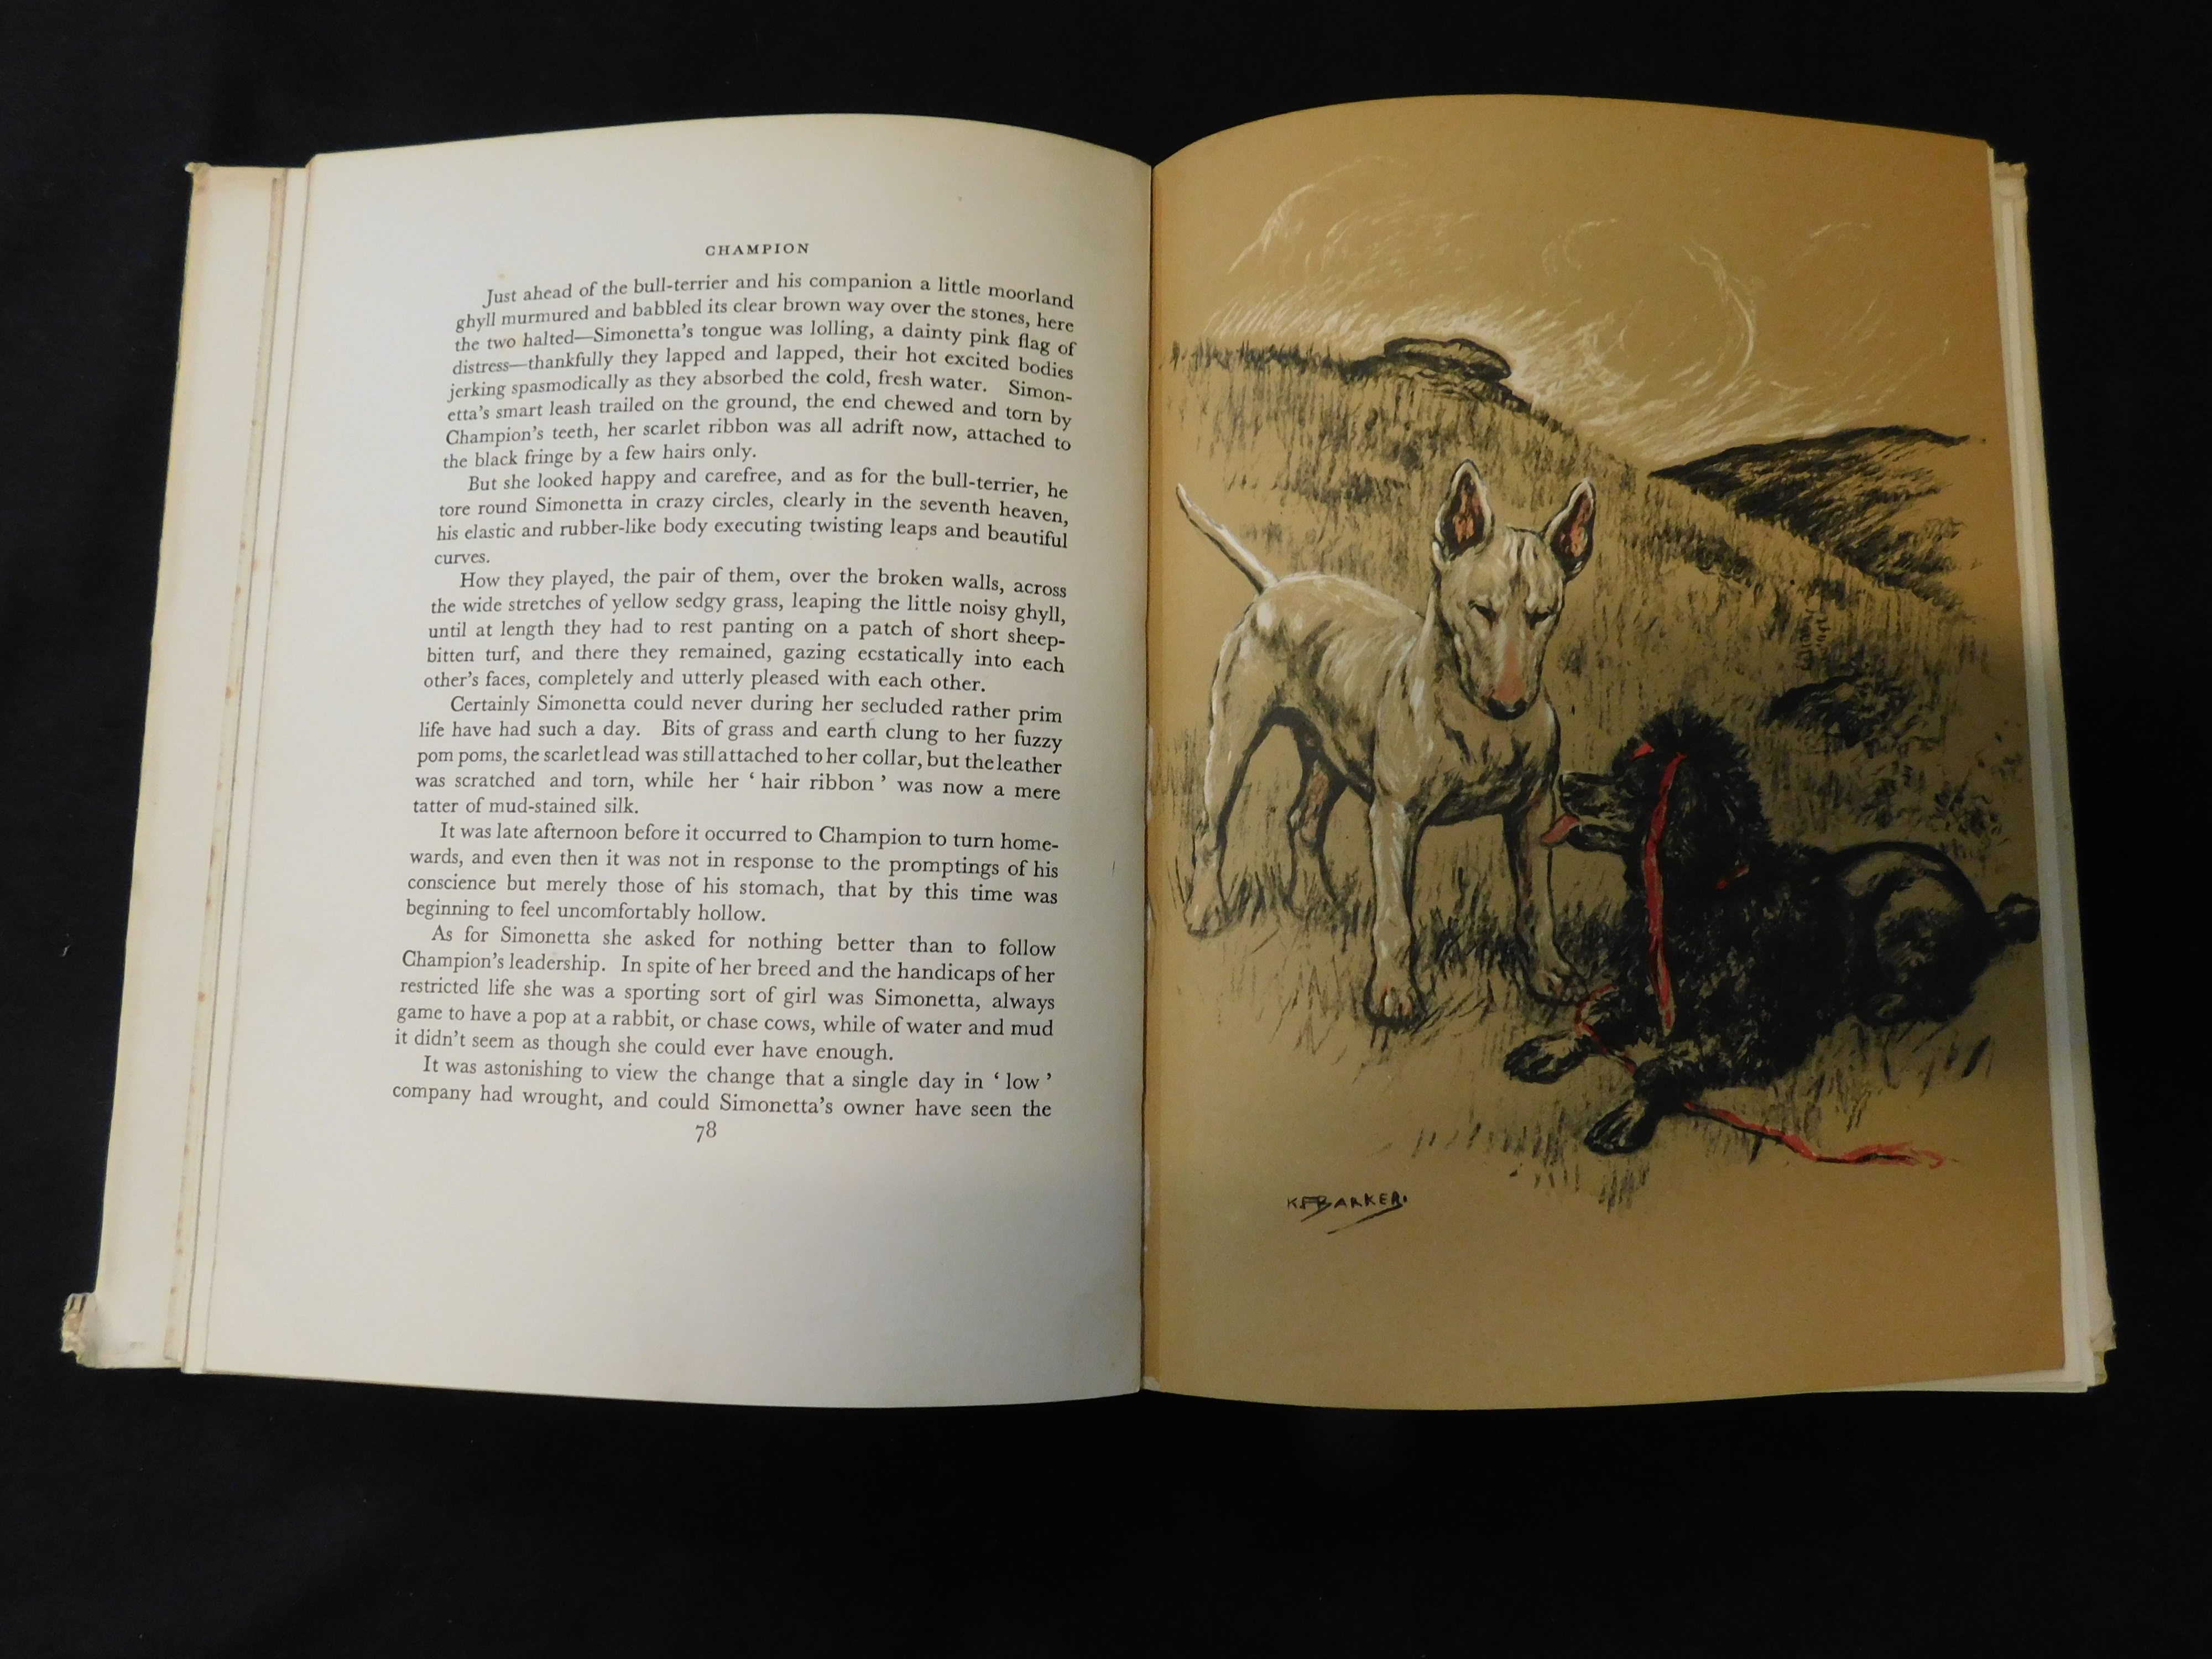 K F BARKER: CHAMPION, THE STORY OF A BULL-TERRIER, London, Country Life, 1936, first edition, 8 - Image 2 of 2